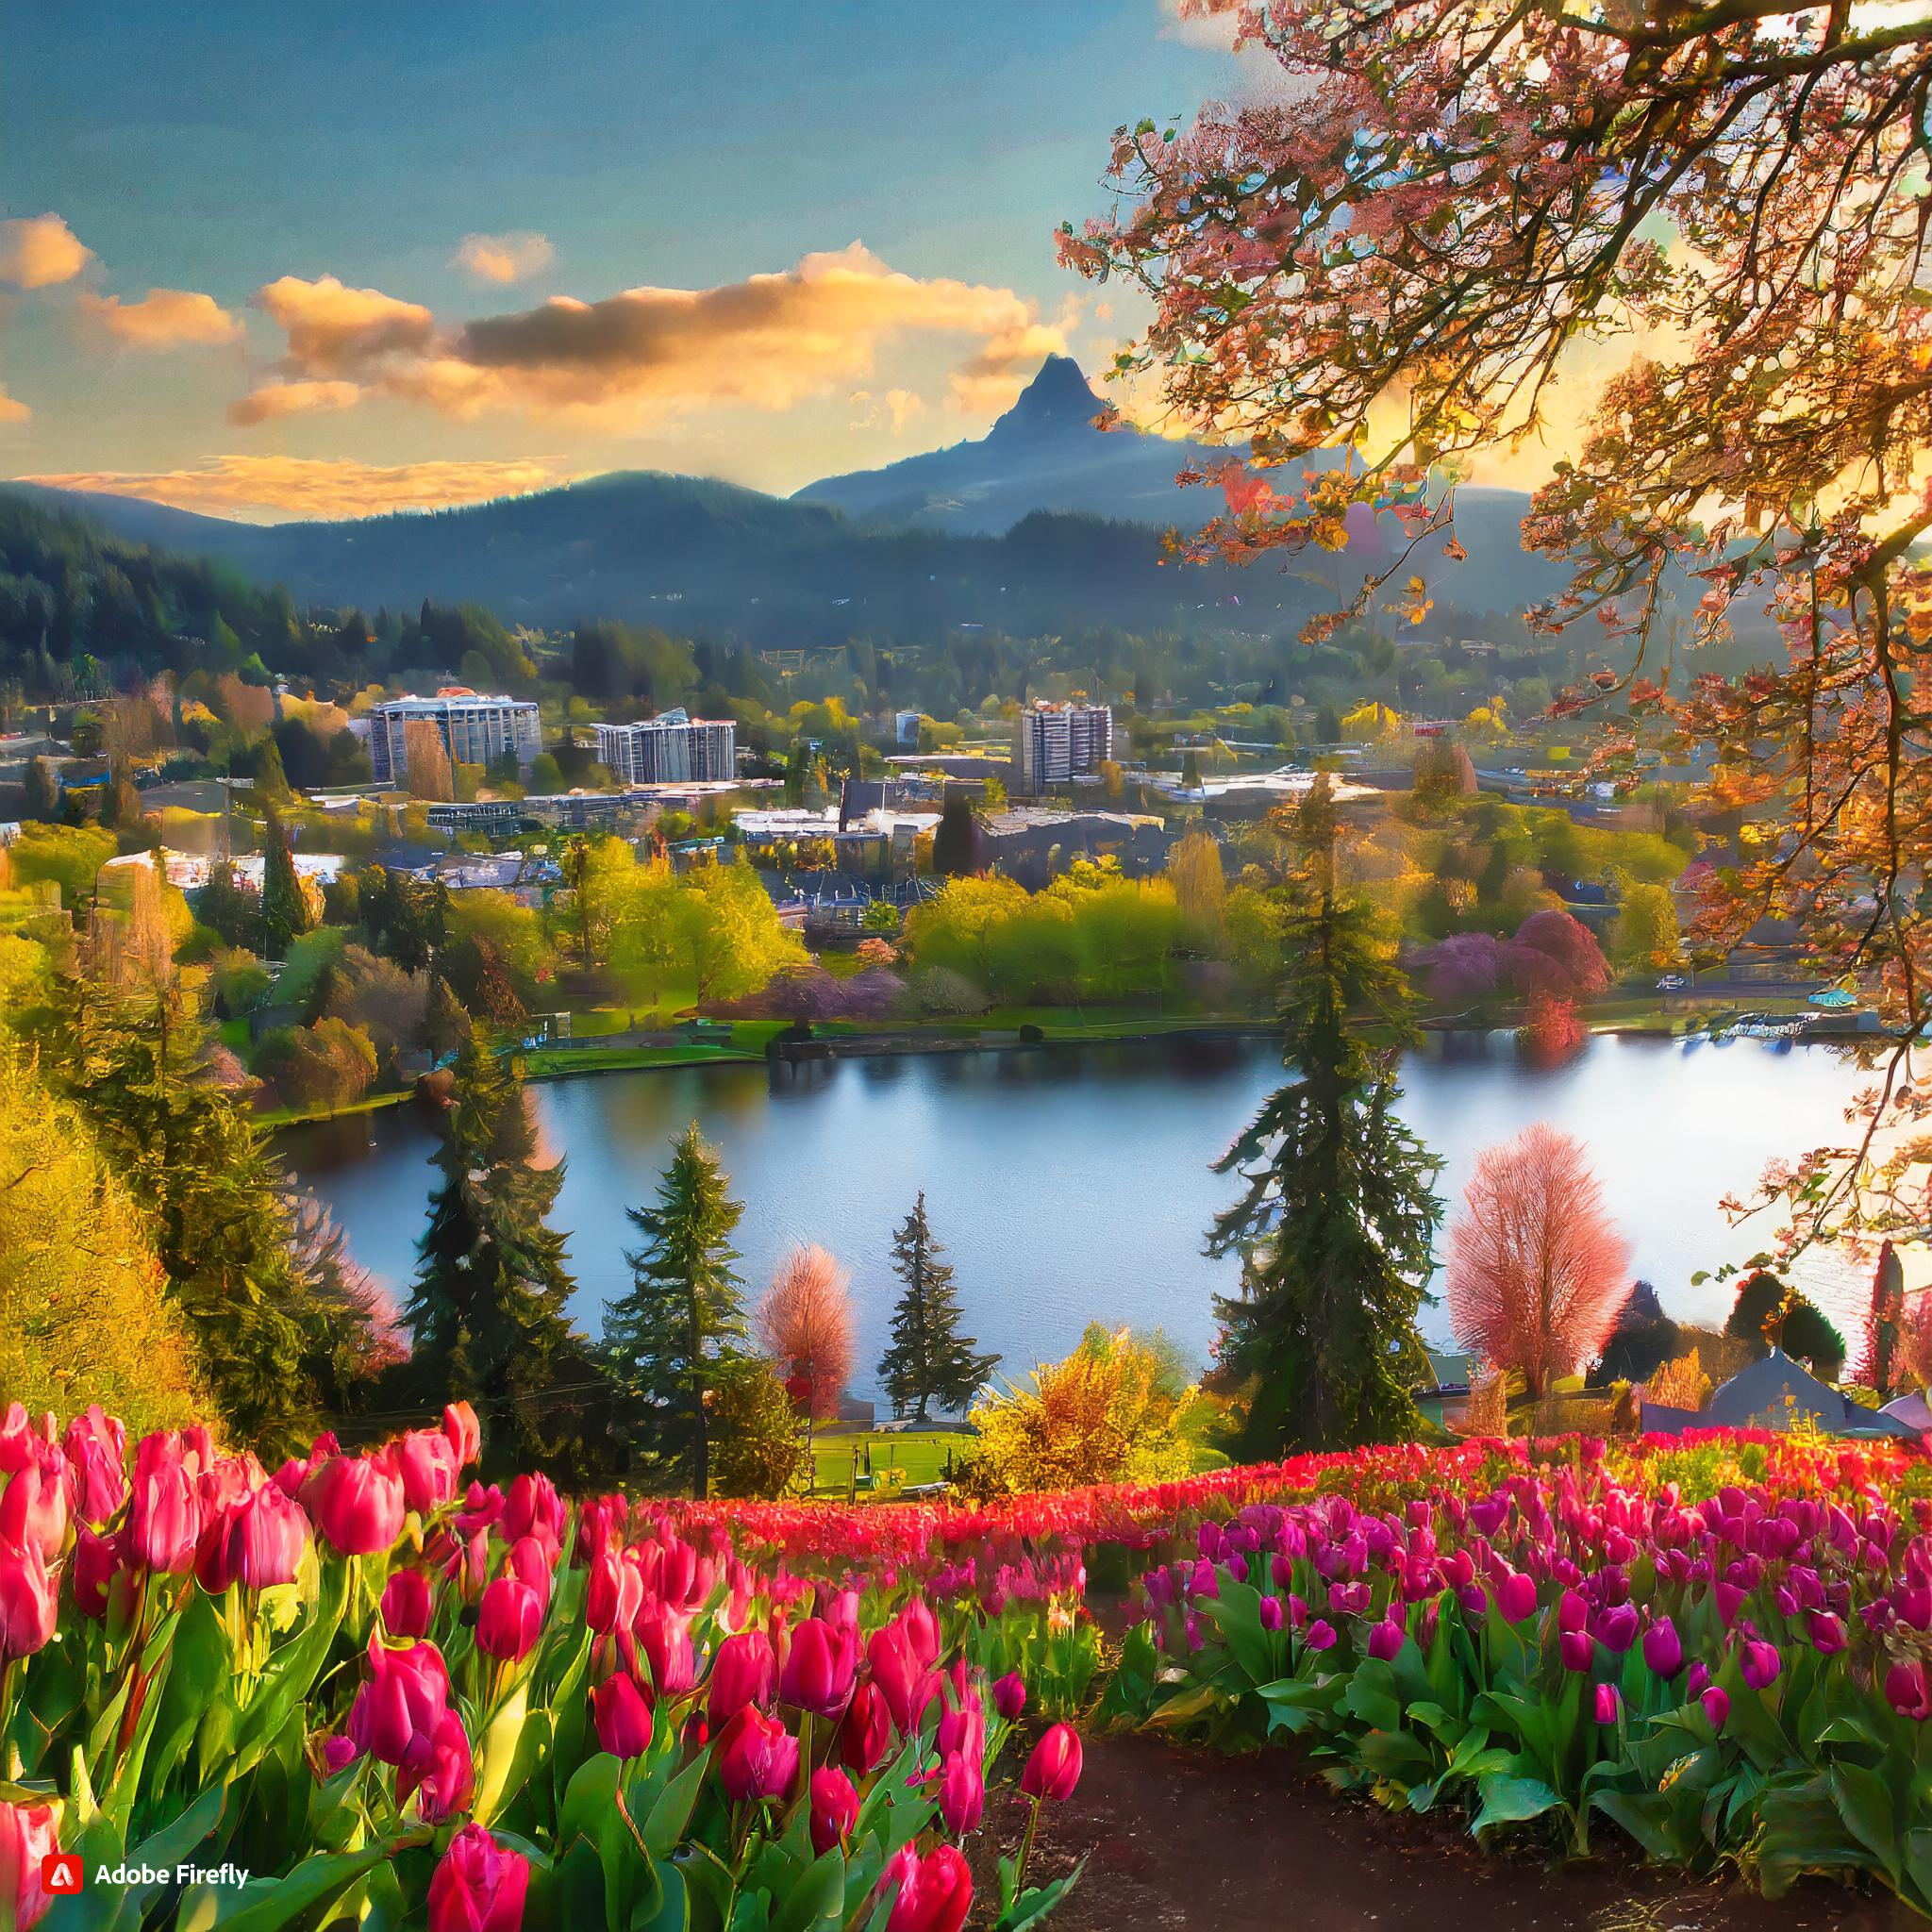  Landscpae of the city in Portland, Oregon, distant mountain view, spring folowers, fall colors, and lake before the city